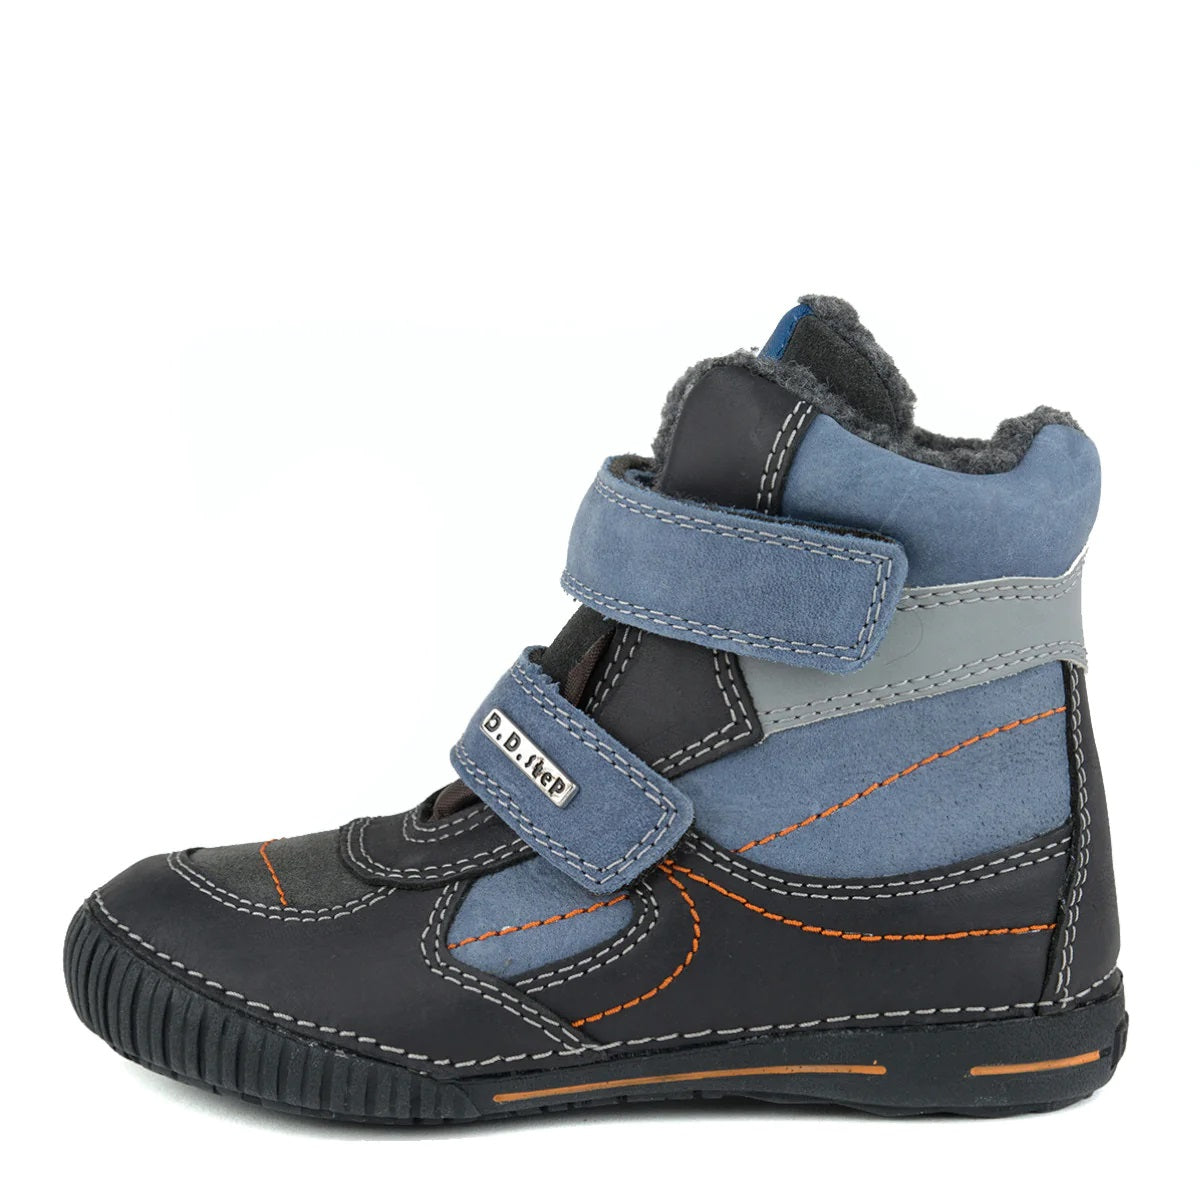 Premium quality high-top shoes with faux fur insulation and genuine leather upper in bermuda blue and black. Thanks to its high level of specialization, D.D. Step knows exactly what your child’s feet need, to develop properly in the various phases of growth. The exceptional comfort these shoes provide assure the well-being and happiness of your child.